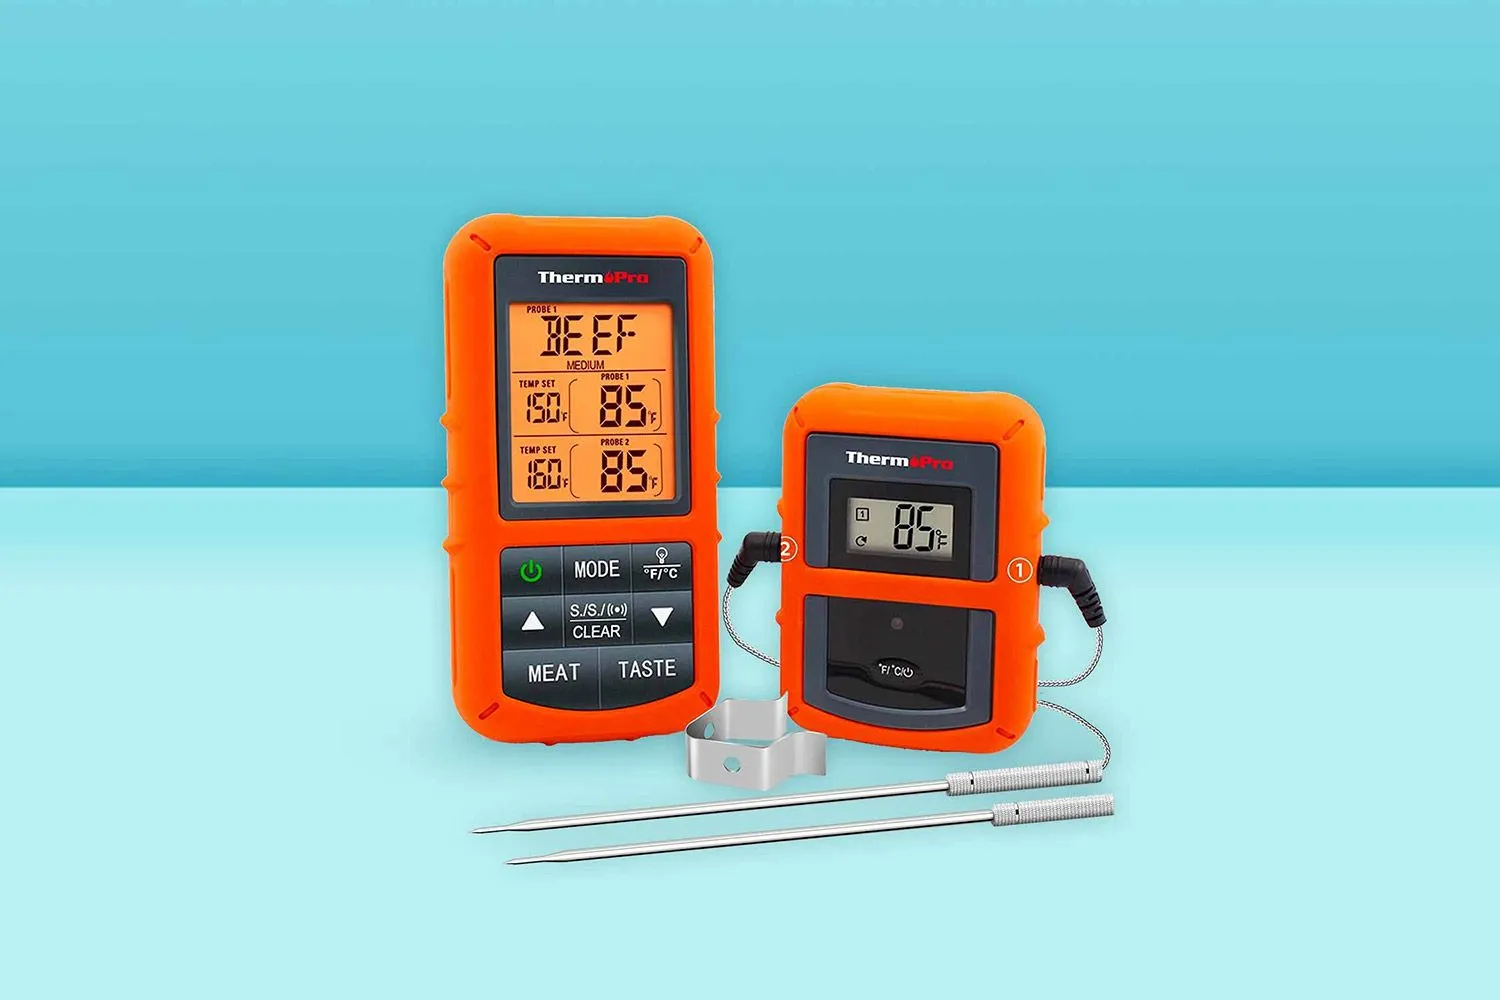 https://cdn.healthykitchen101.com/reviews/images/thermometers/best-meat-thermometers-clj5e5r4j003qab88fasbb1zr.jpg